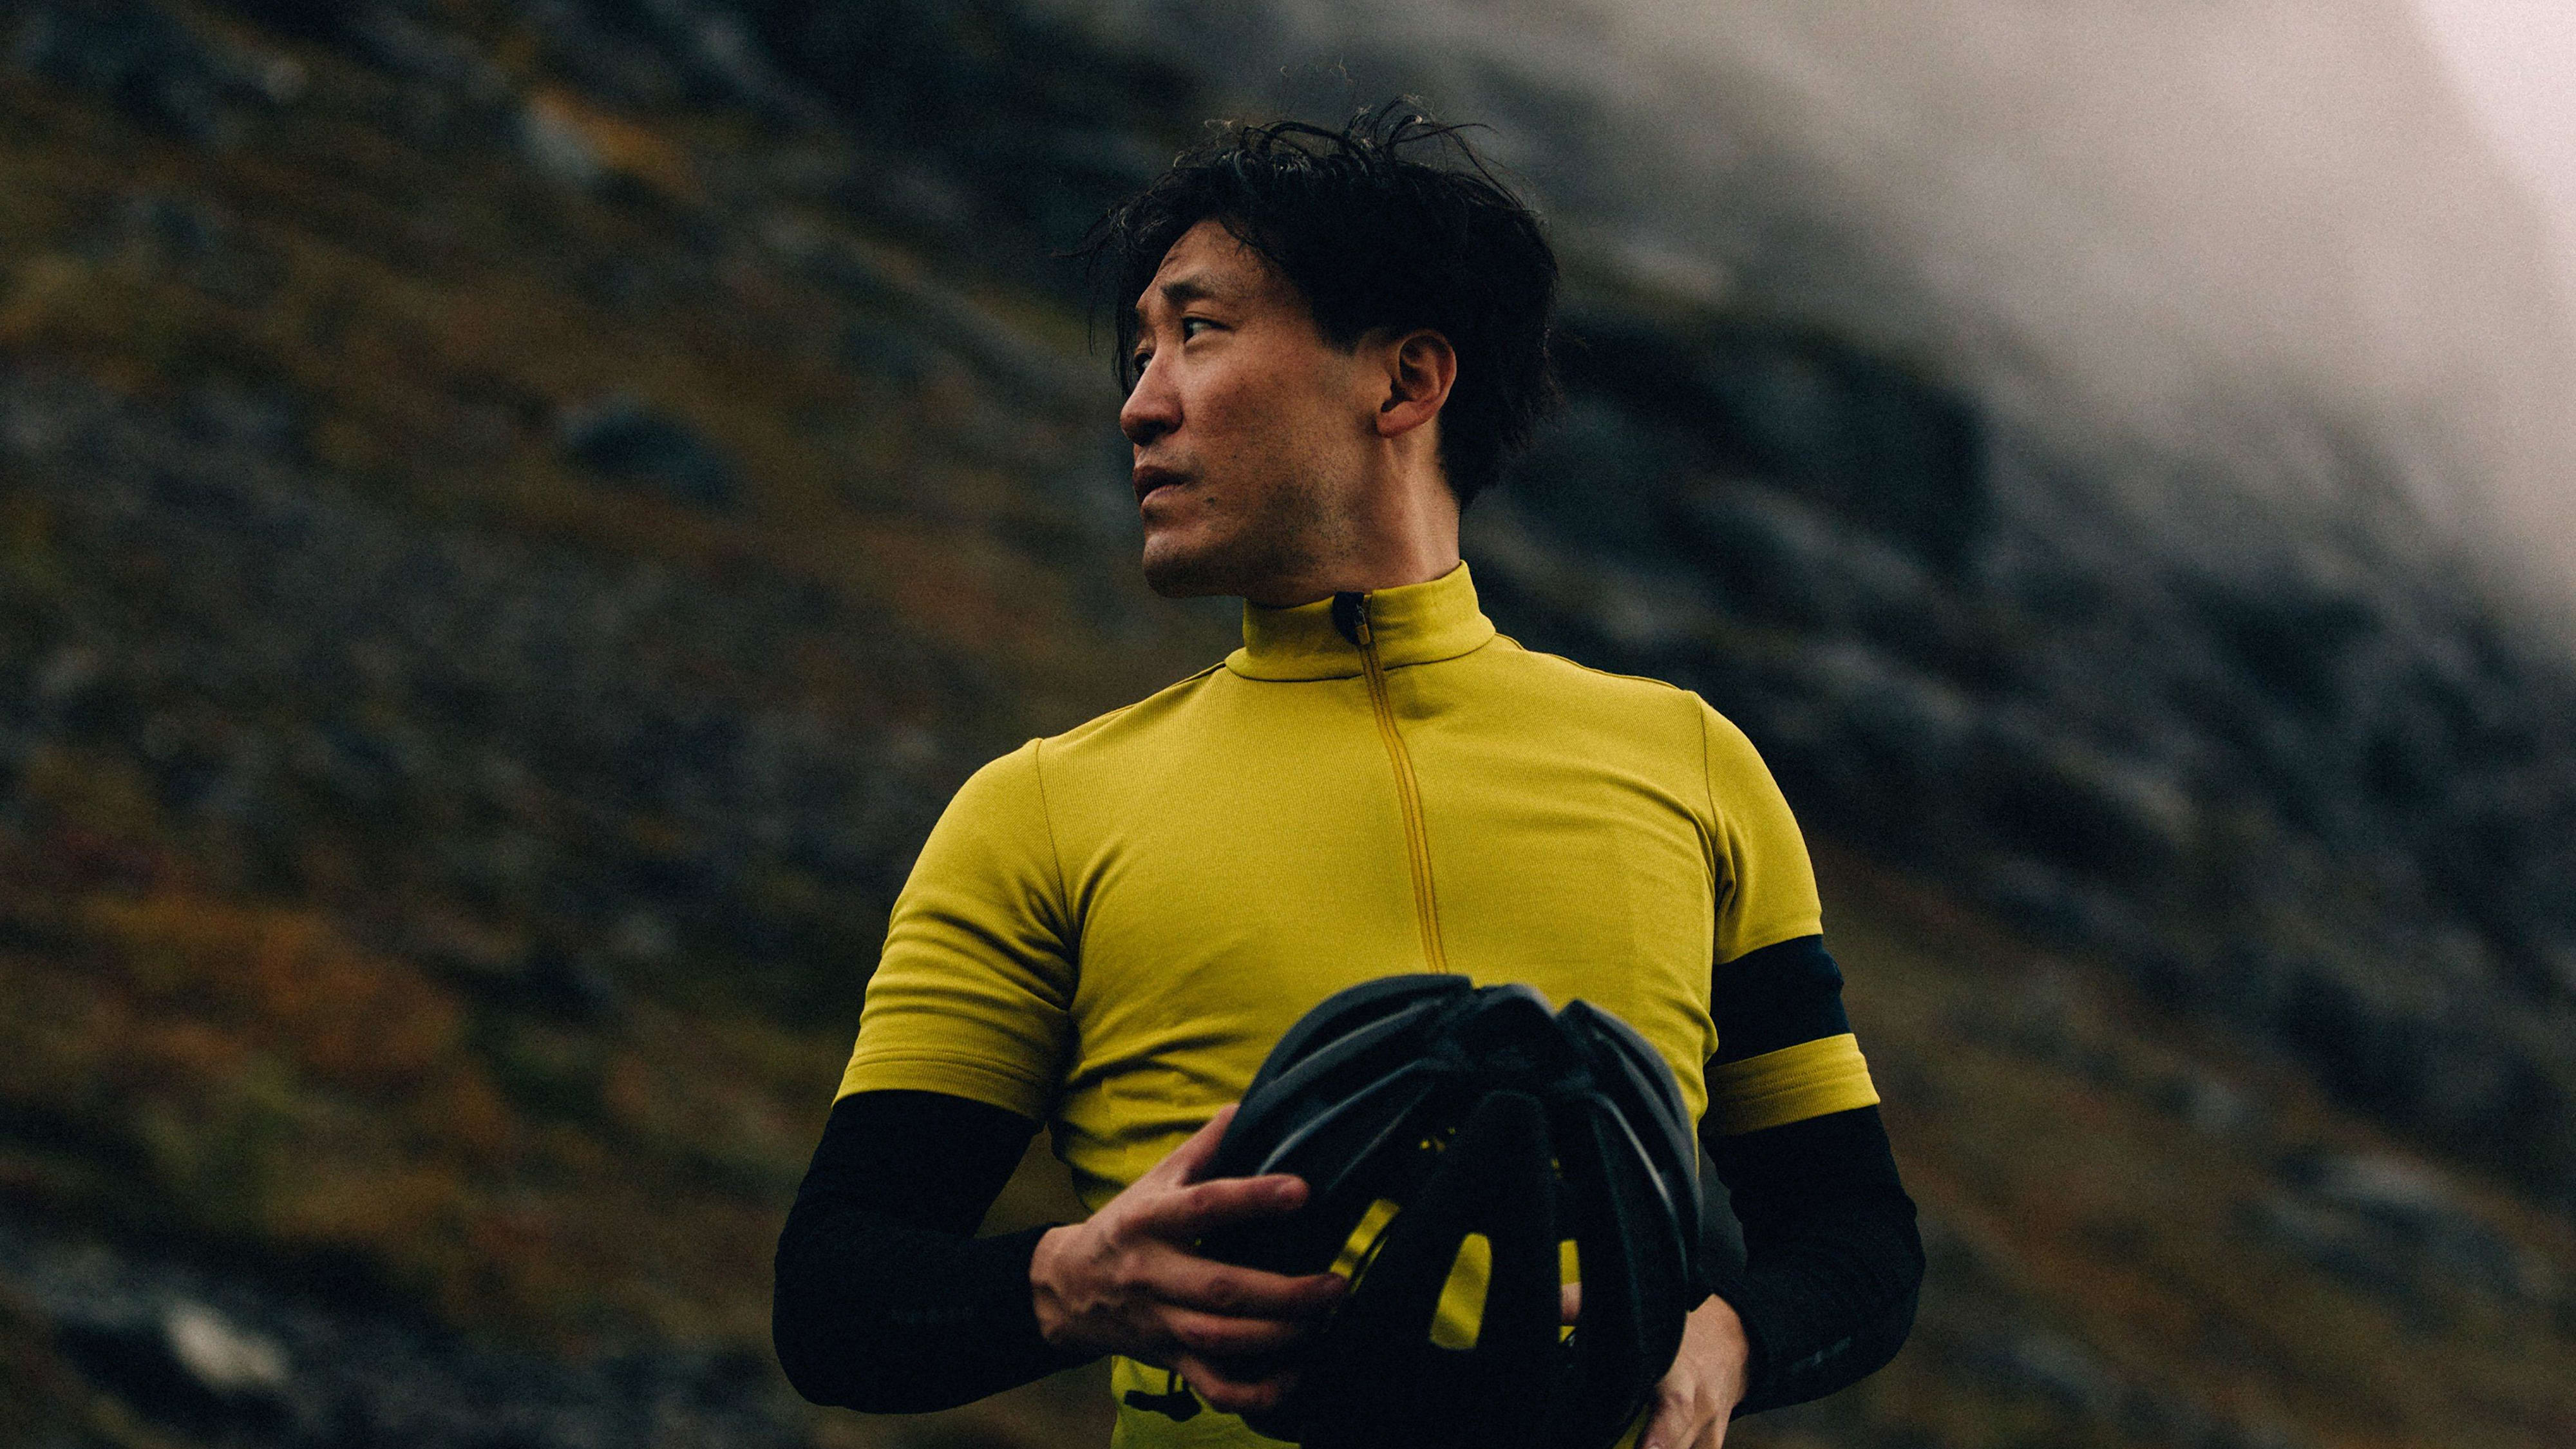 Cycling Jerseys for Autumn